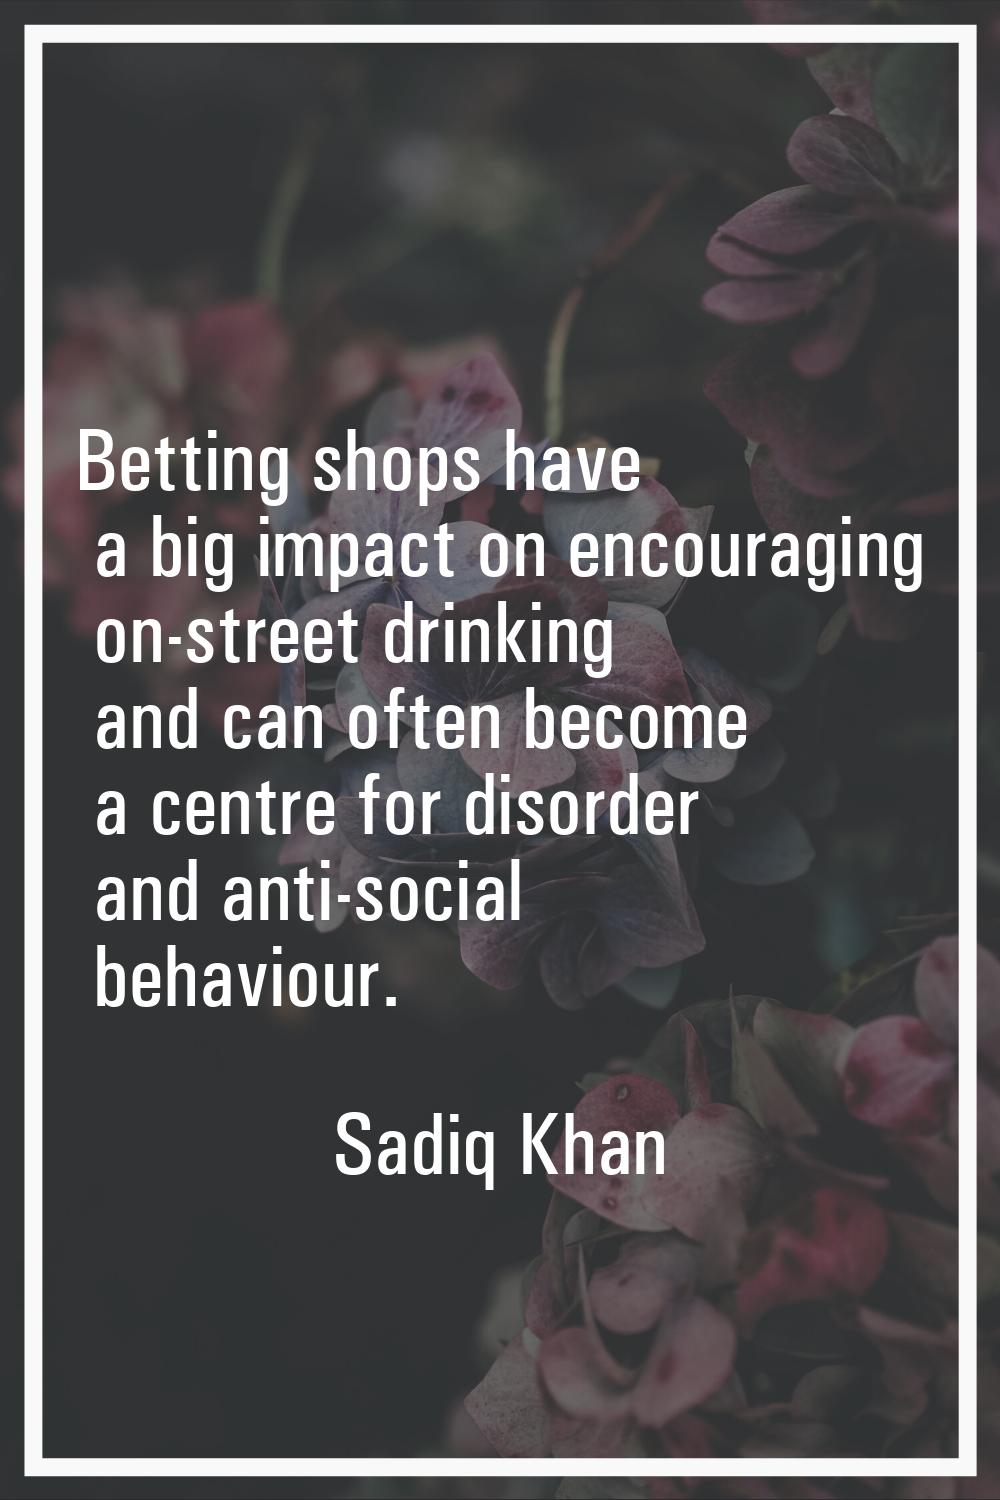 Betting shops have a big impact on encouraging on-street drinking and can often become a centre for